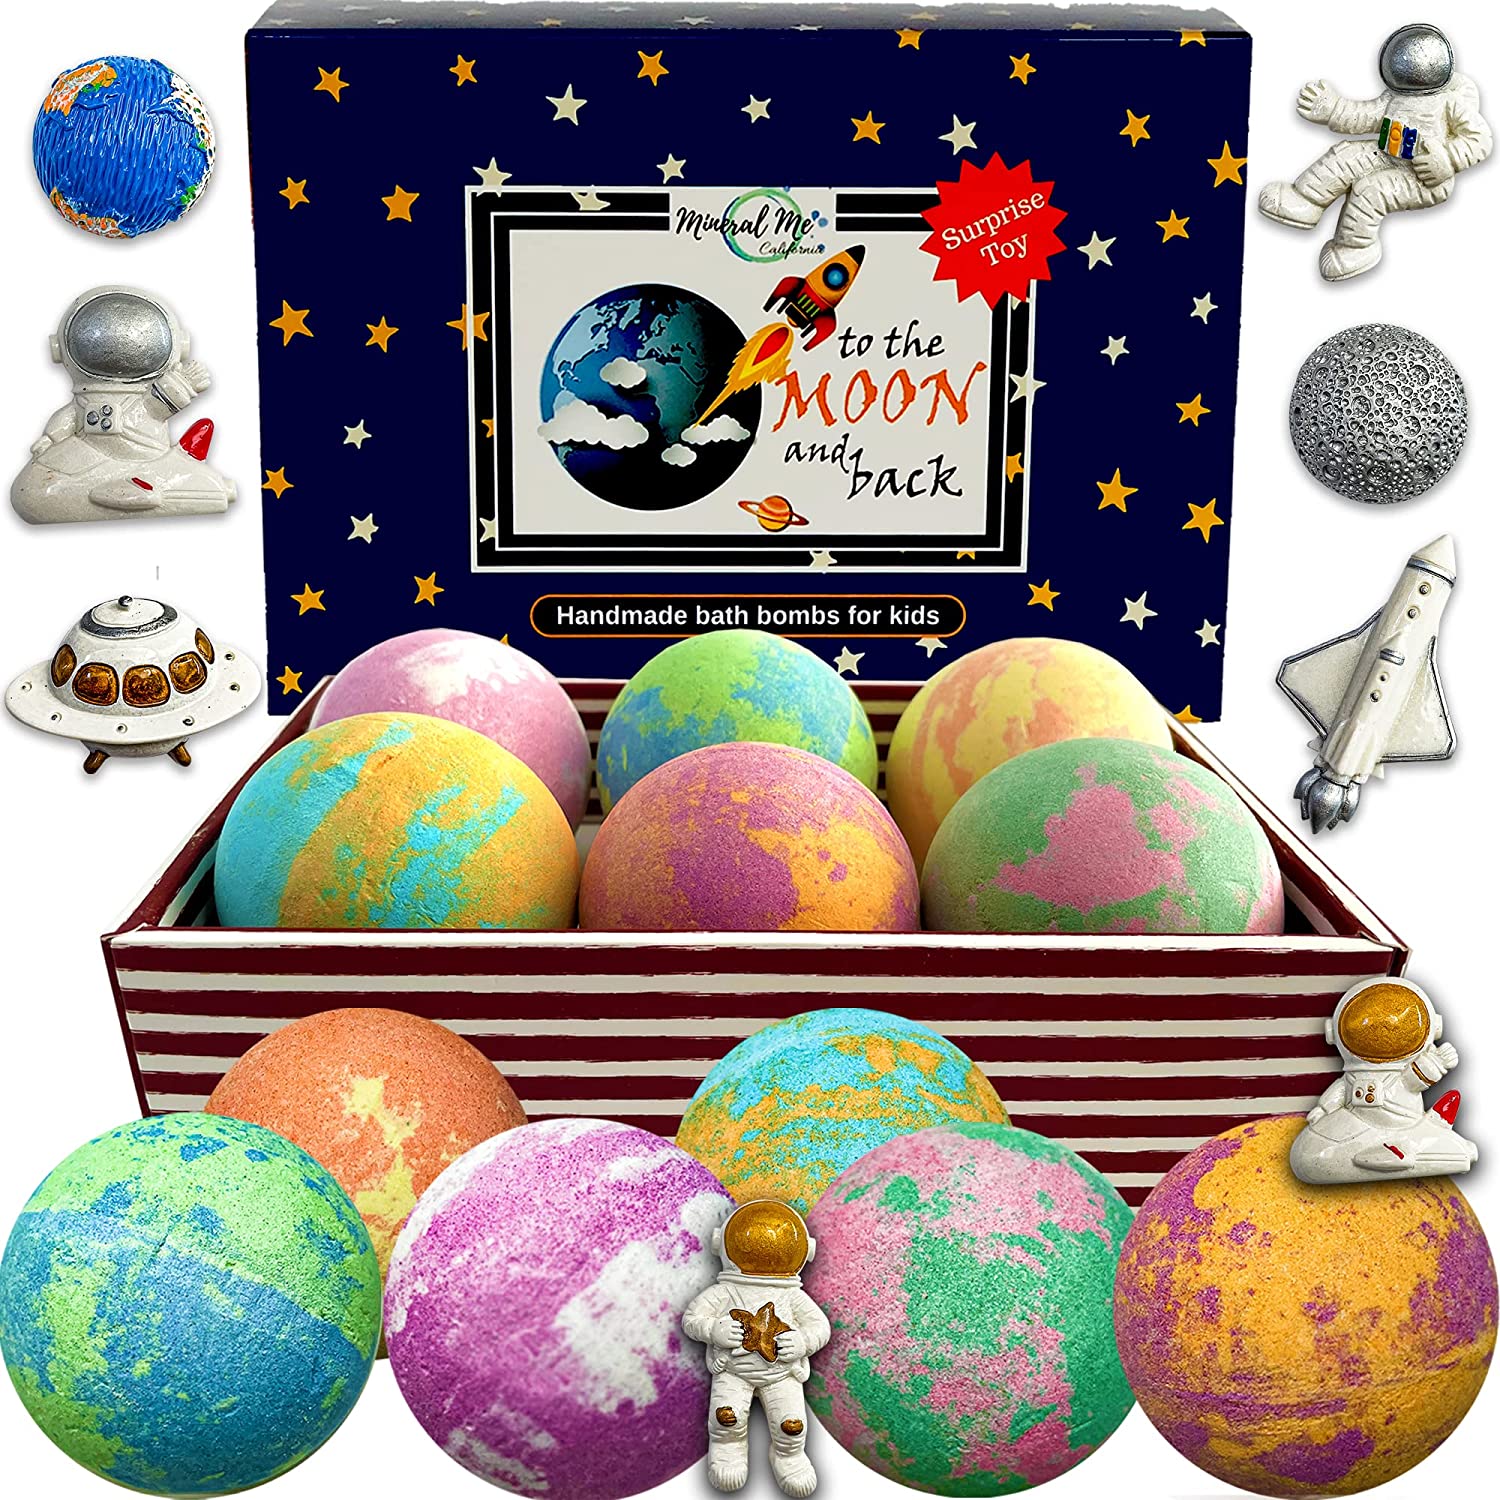 Wholesale Galaxy Bath Bombs For Kids With Toys Inside 